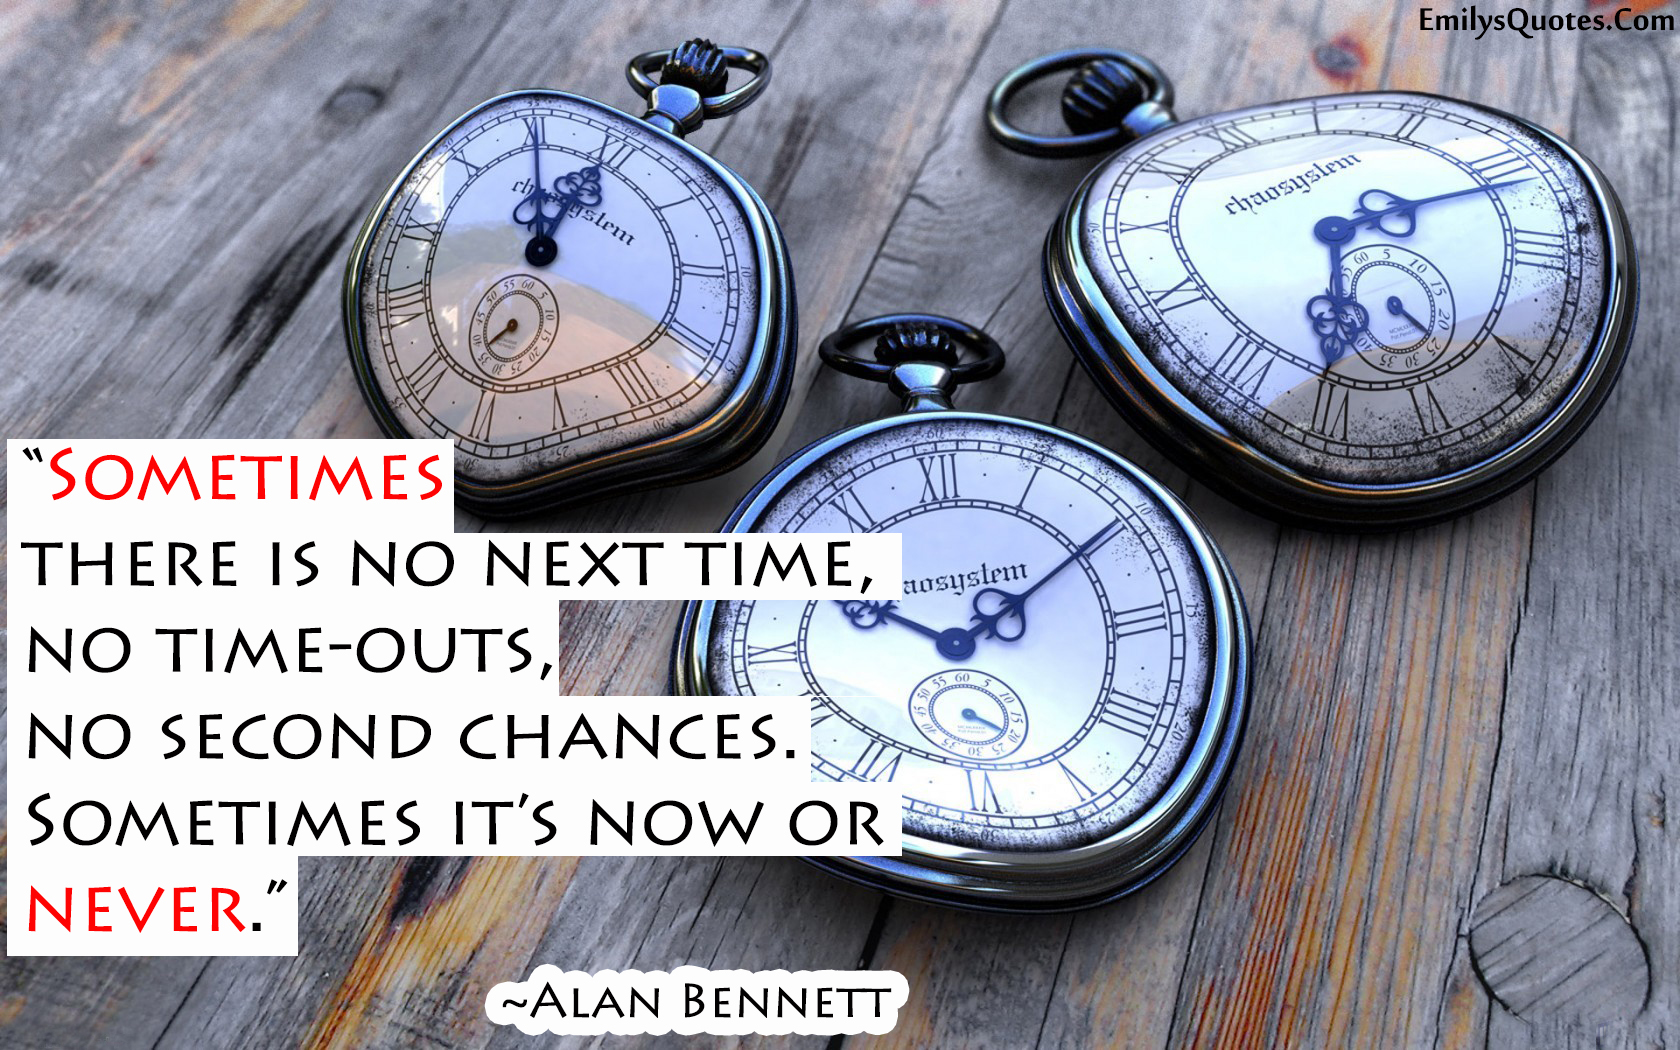 Sometimes there is no next time, no time-outs, no second chances. Sometimes it’s now or never